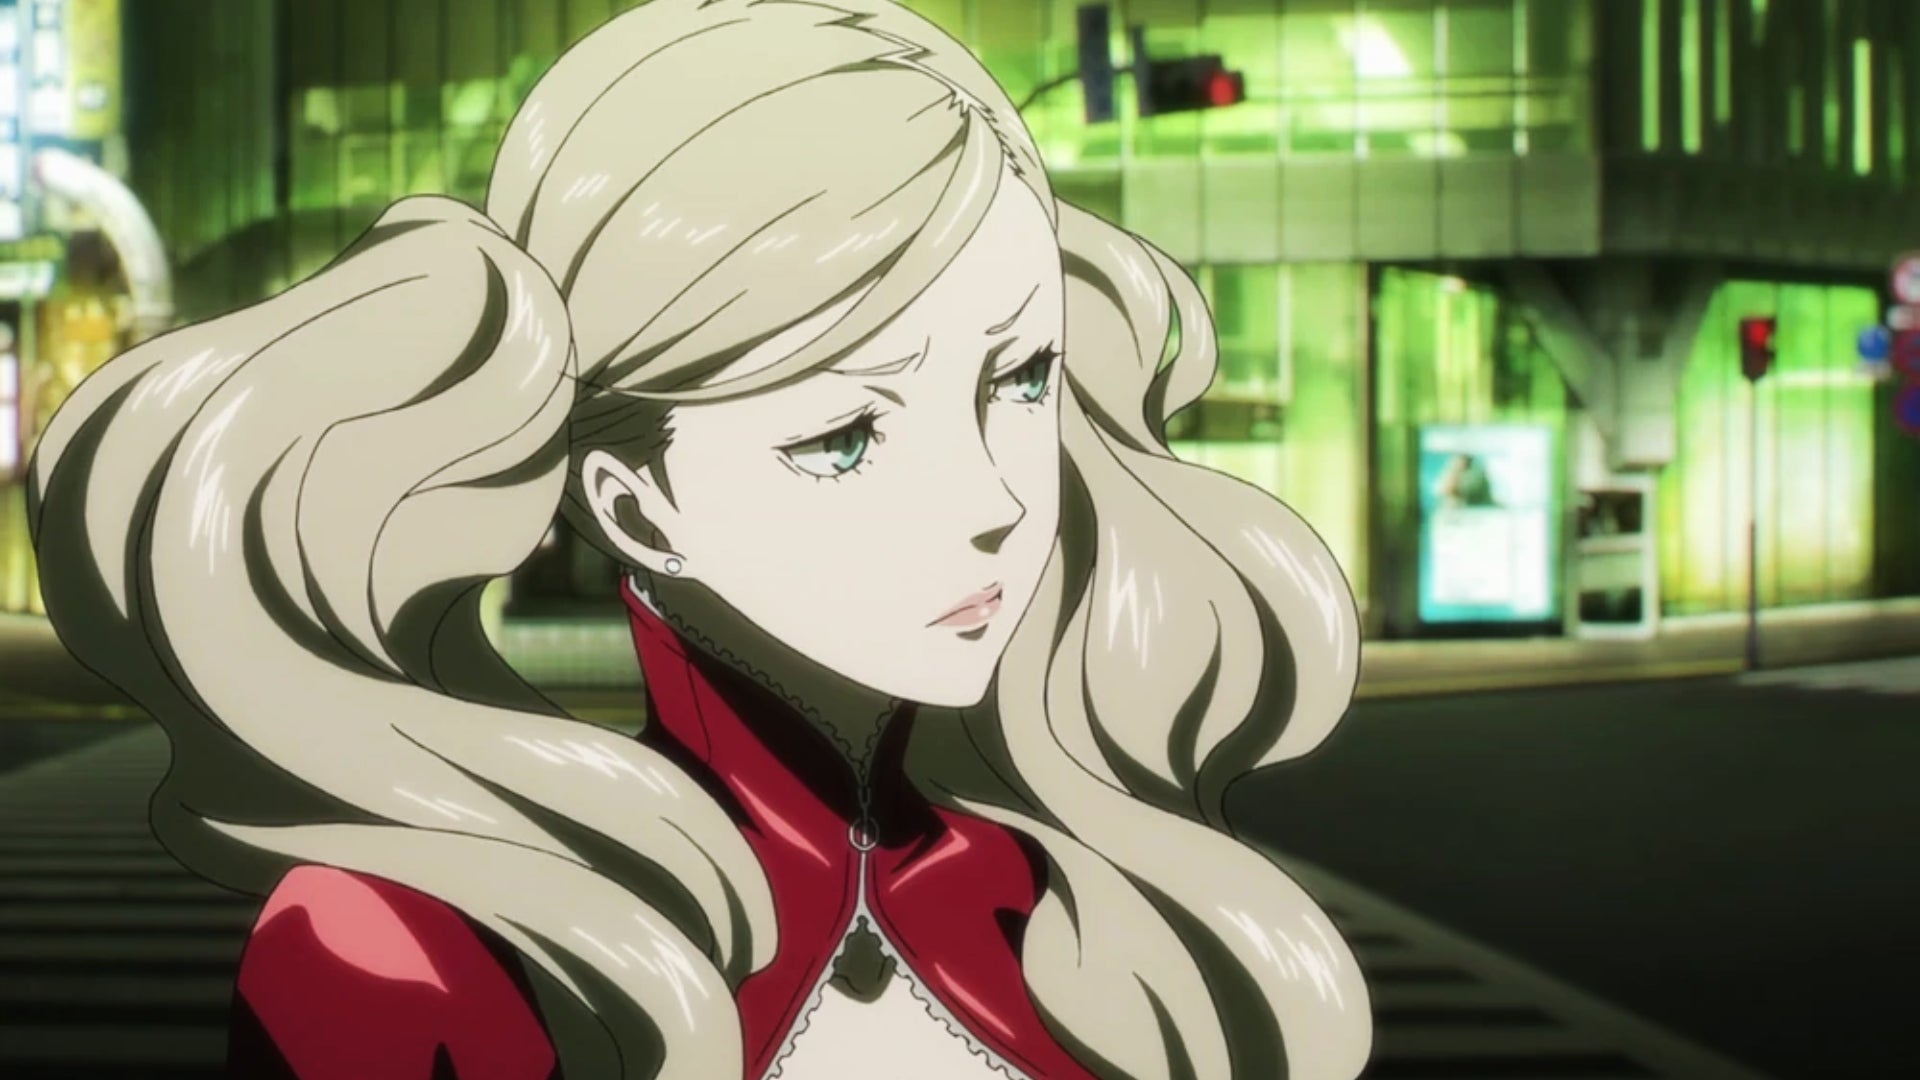 Persona 5 Ann Confidant choices: An anime girl with blonde hair and a red leather suit stands on a crowded street